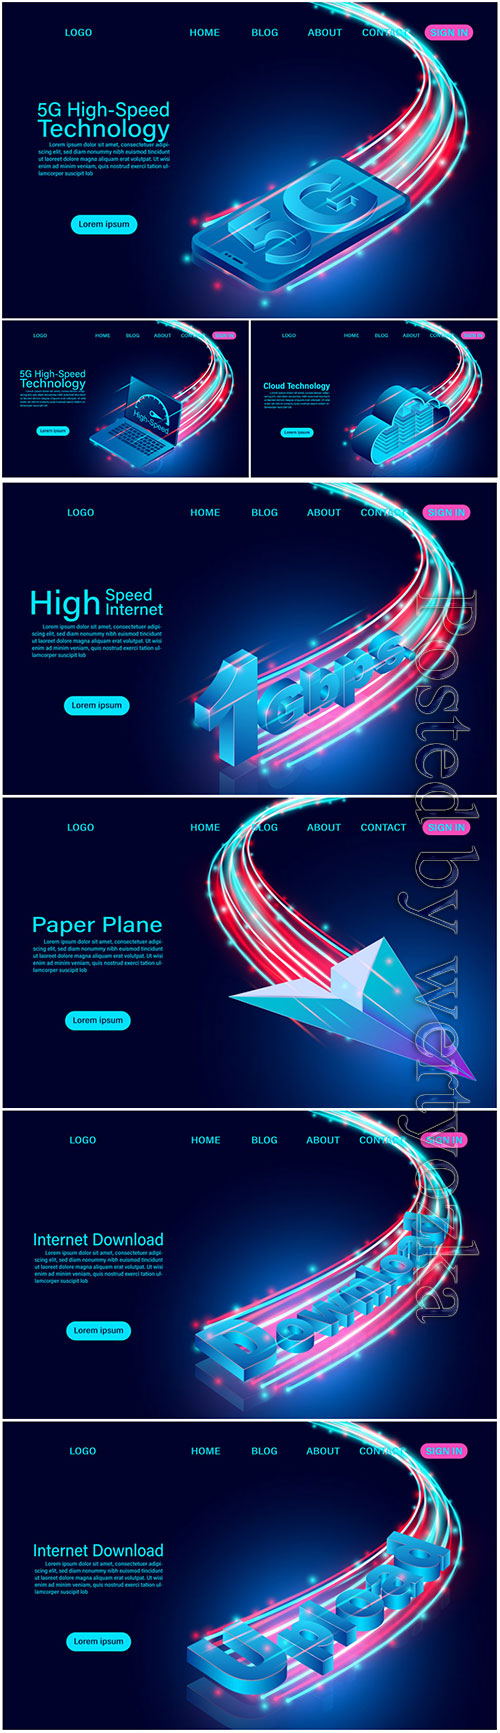 Banner with Internet concept isometric illustration